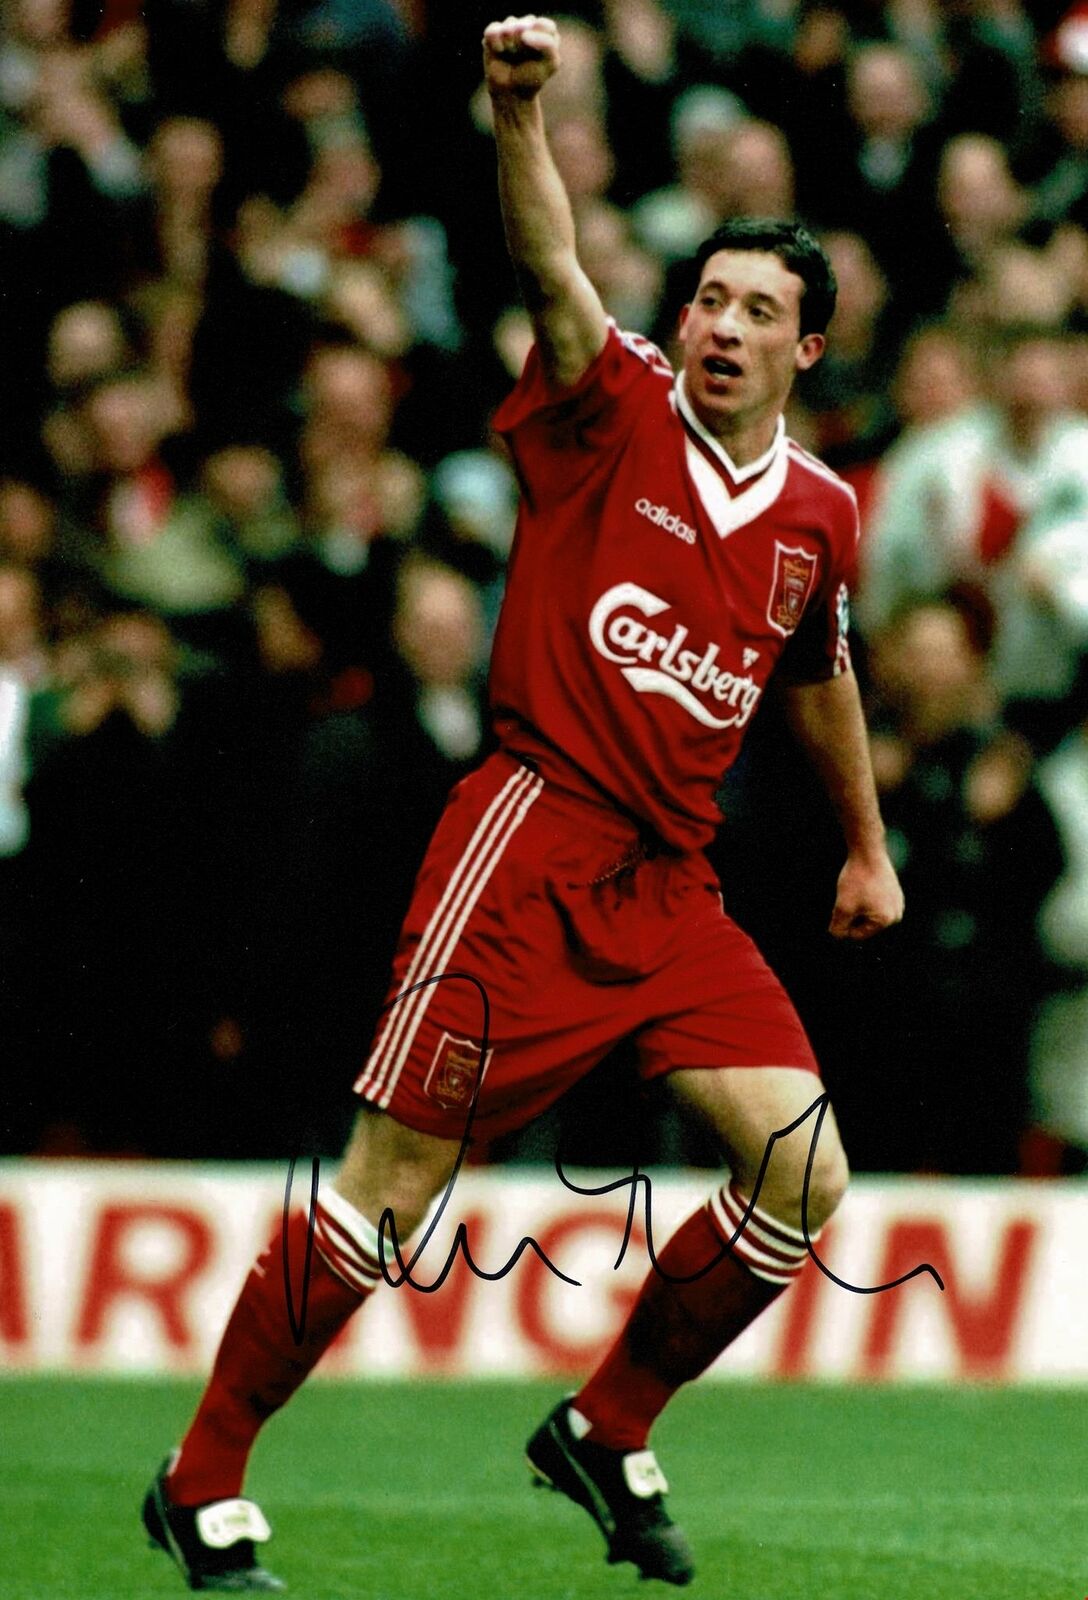 Robbie Fowler SIGNED 12X8 Photo Poster painting GENUINE Liverpool FC SIGNATURE AFTAL COA (1630)